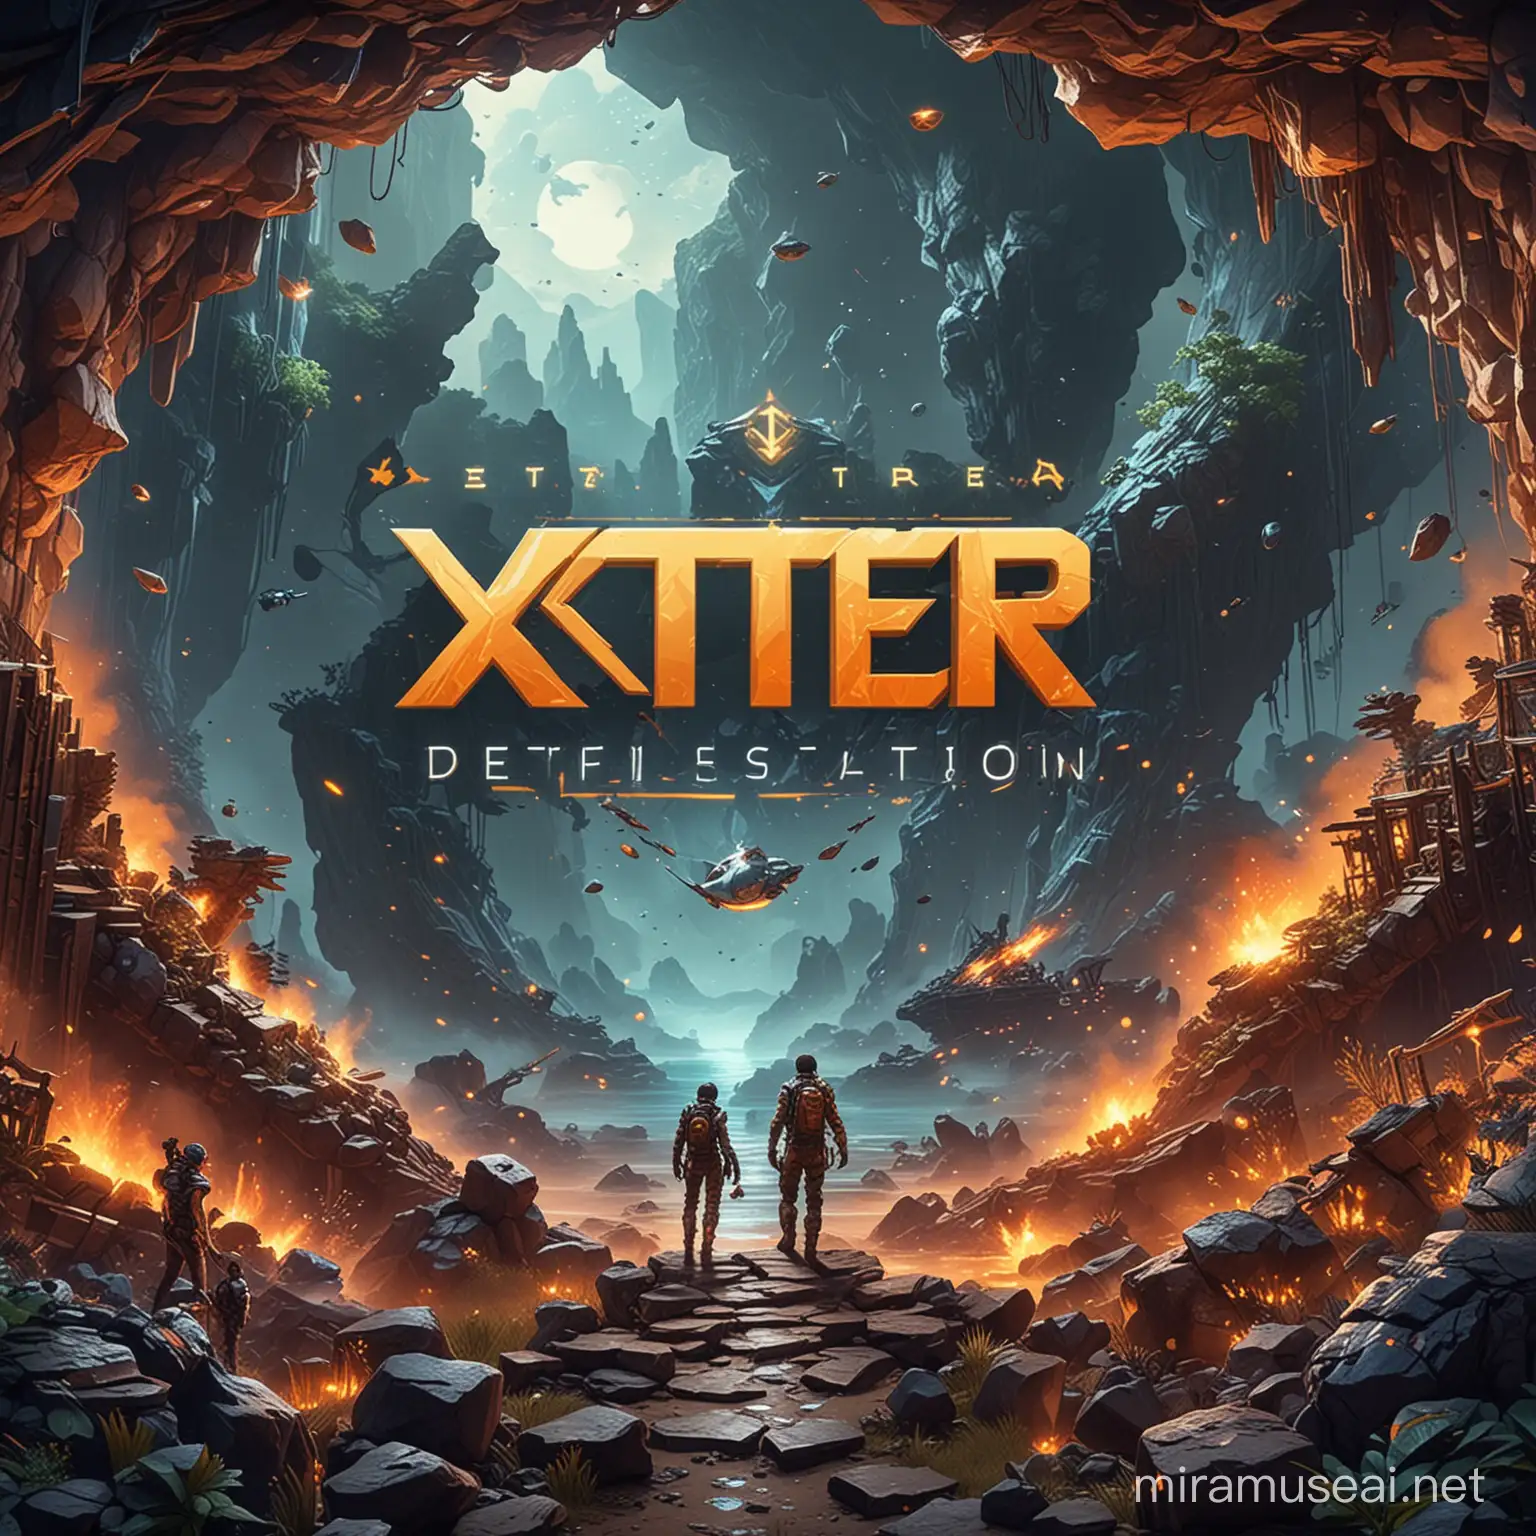 Detailed Exploration with Xter and Xteriogames